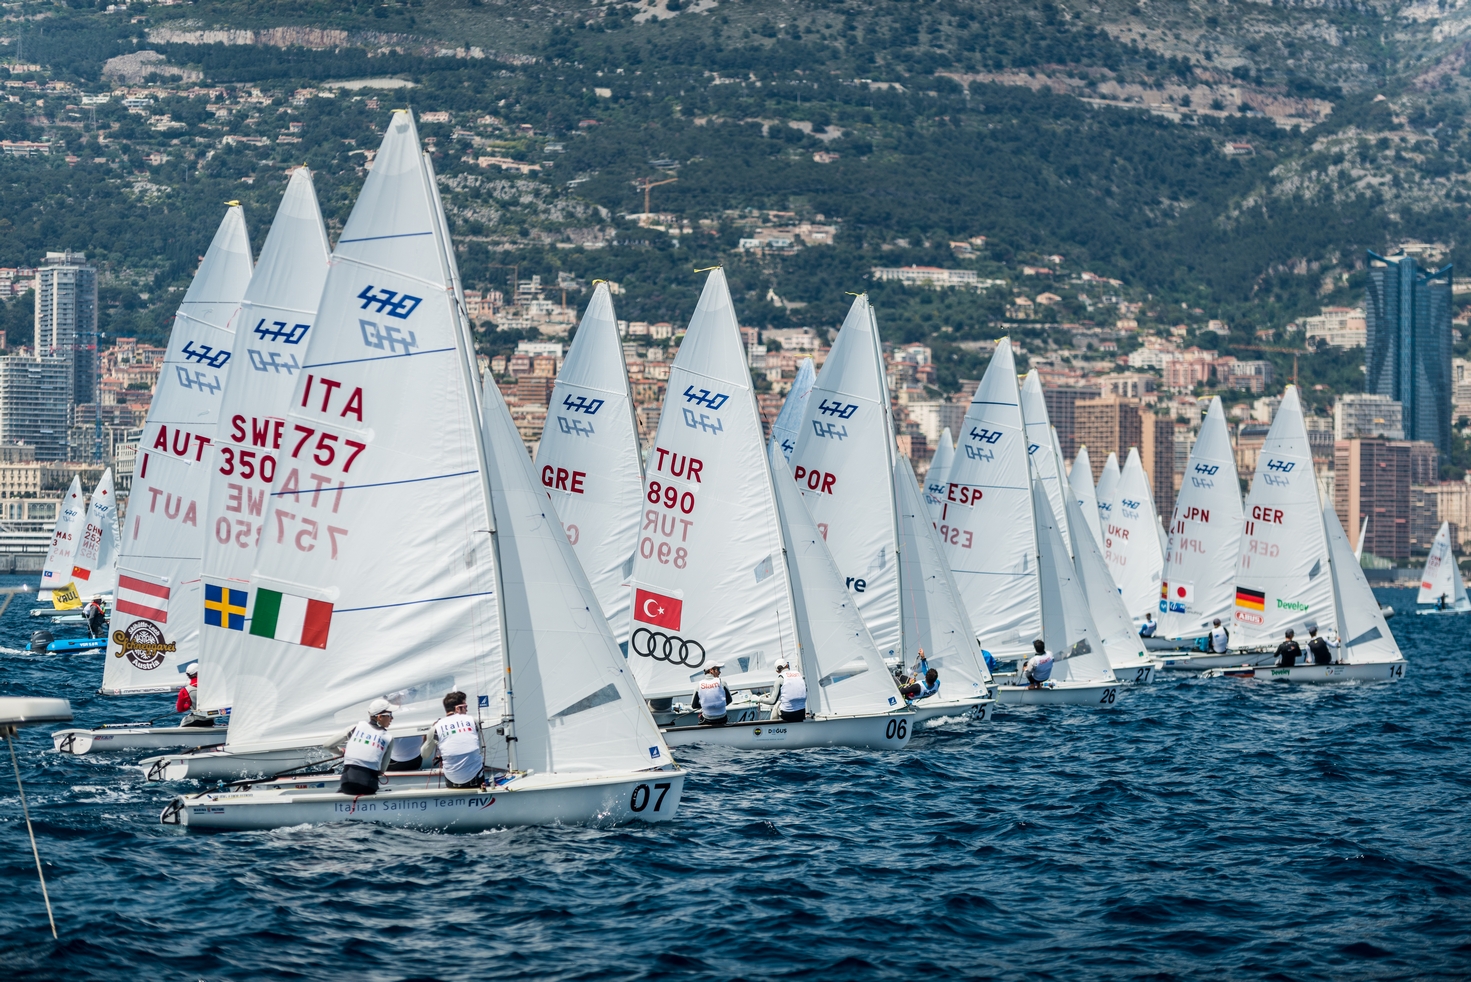 Kicks off for the 470, the two-person Olympic dinghy for men and women. Barely has round 3 of the Sailing World Cup ended in Hyères, France and teams are heading for the Principality, some keen to consolidate their results and others determined to shuffle the pack. The provisional entry list features 90 teams representing 25 nations, and fourteen of these teams competed at the Rio 2016 Olympics.